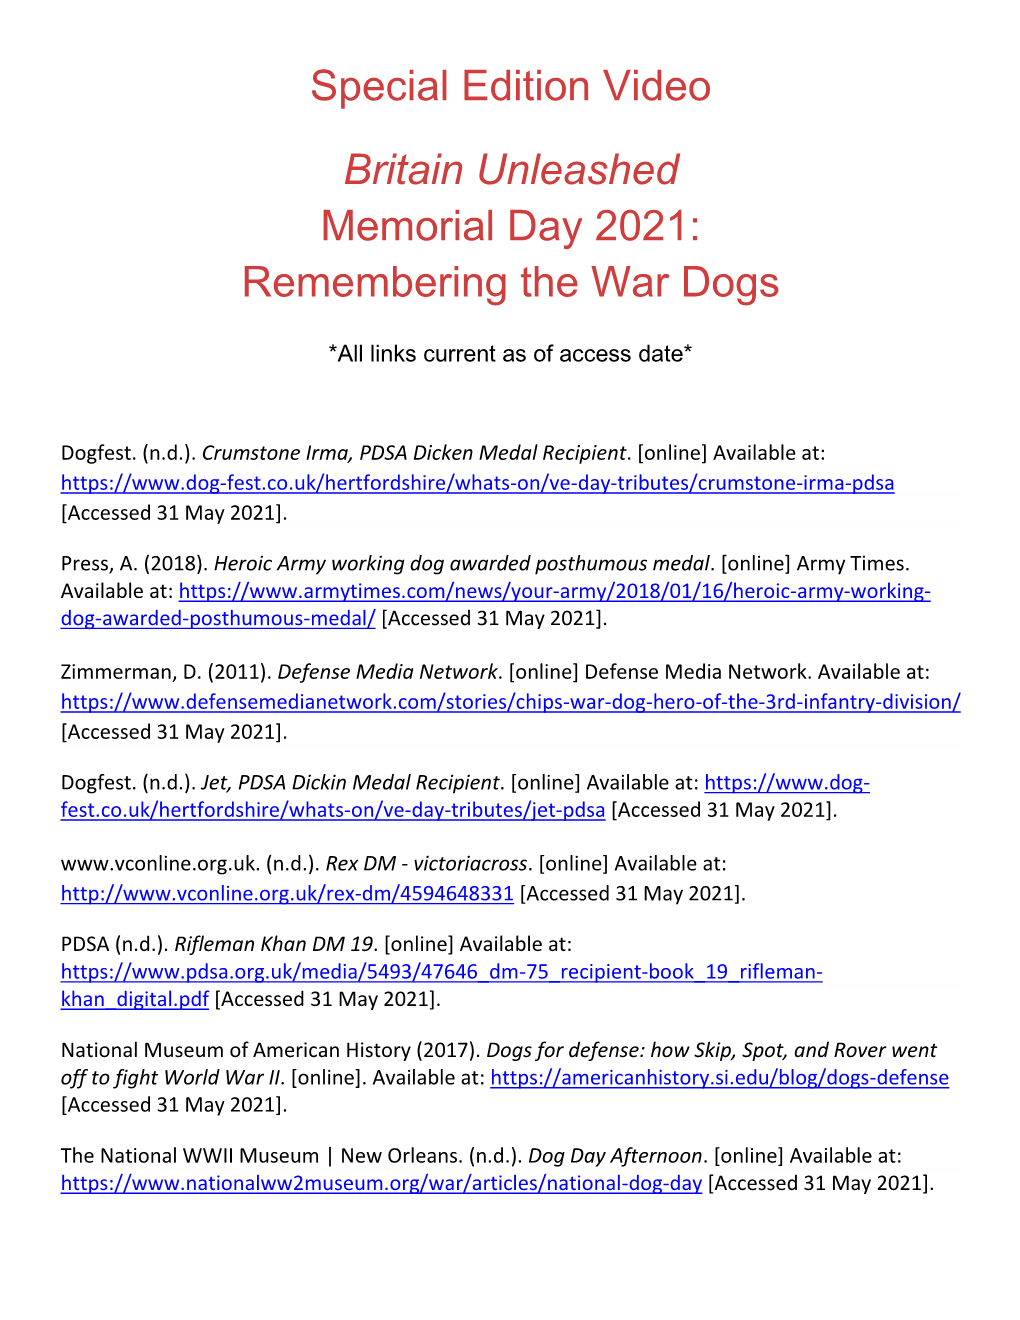 Special Edition Video Britain Unleashed Memorial Day 2021